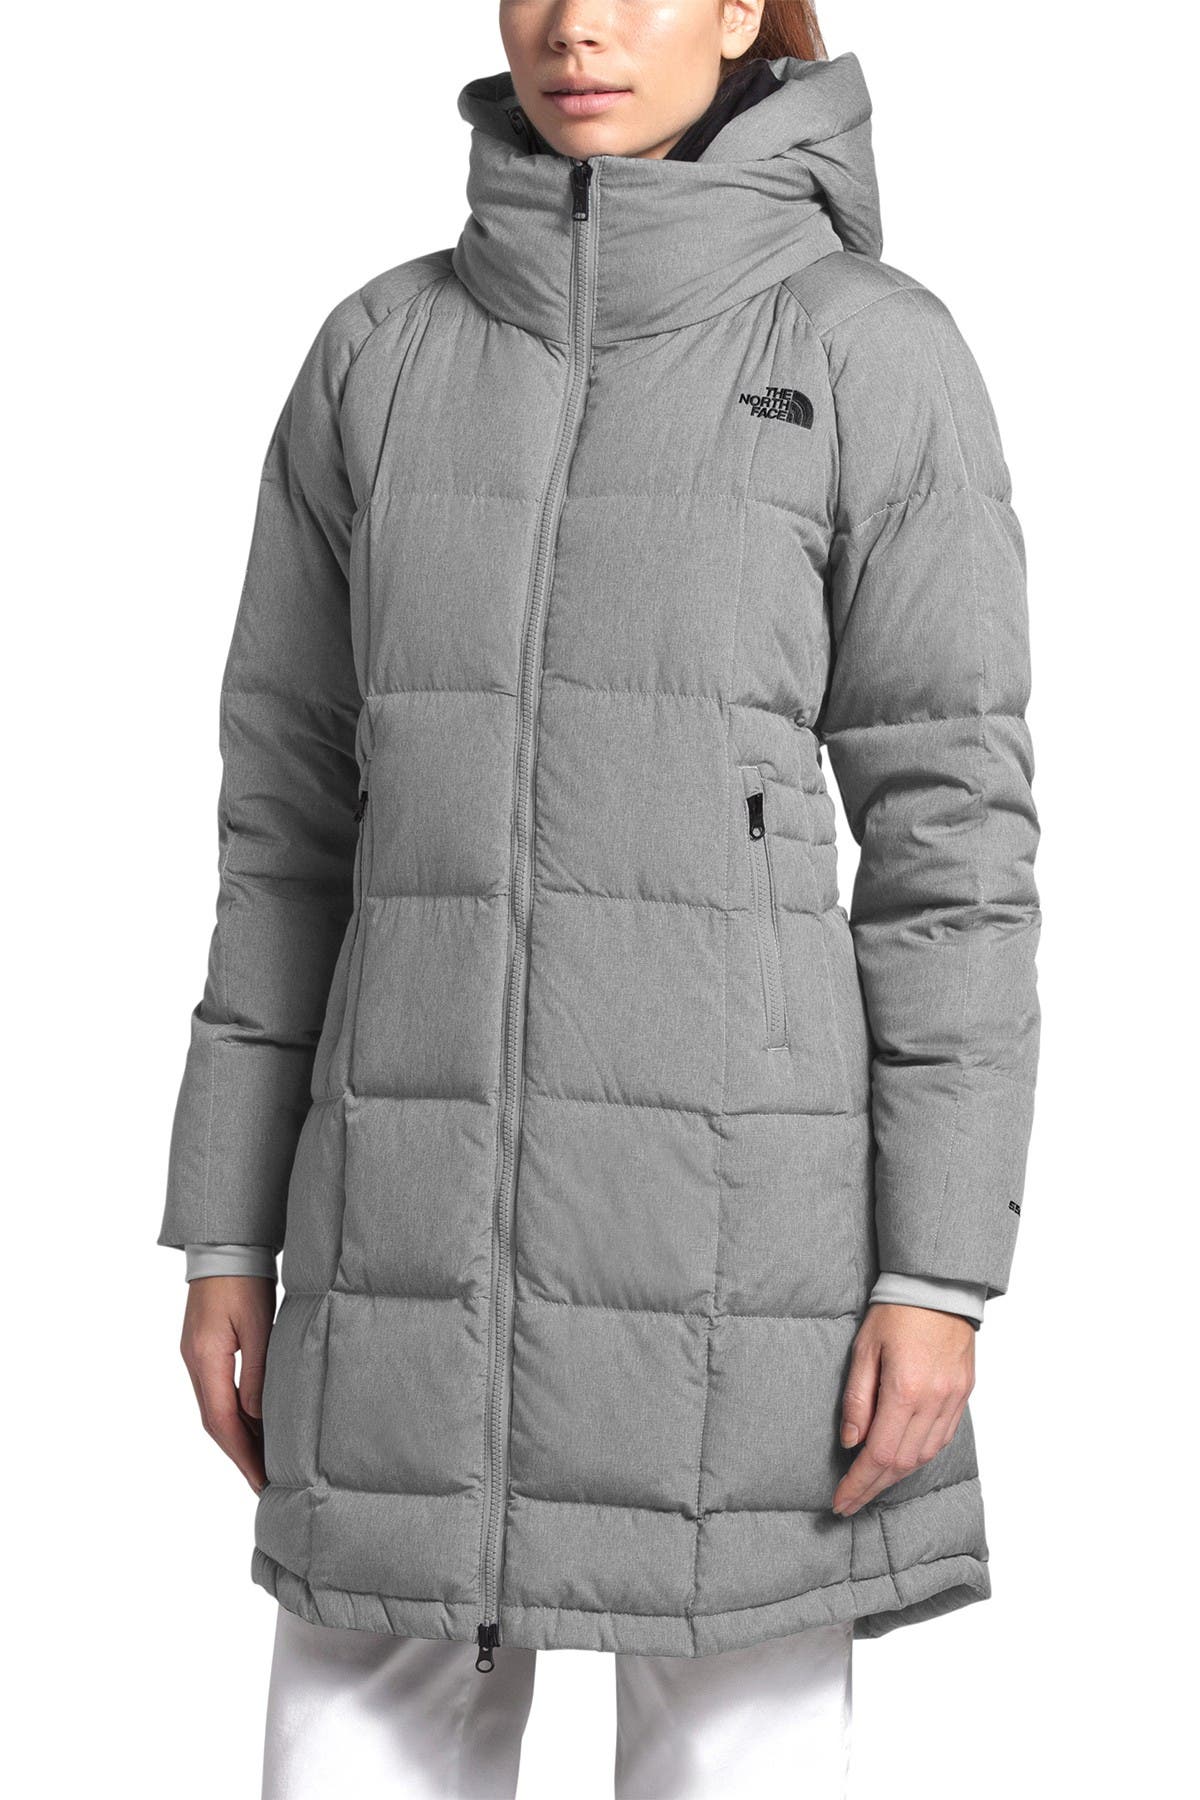 north face quilted down jacket